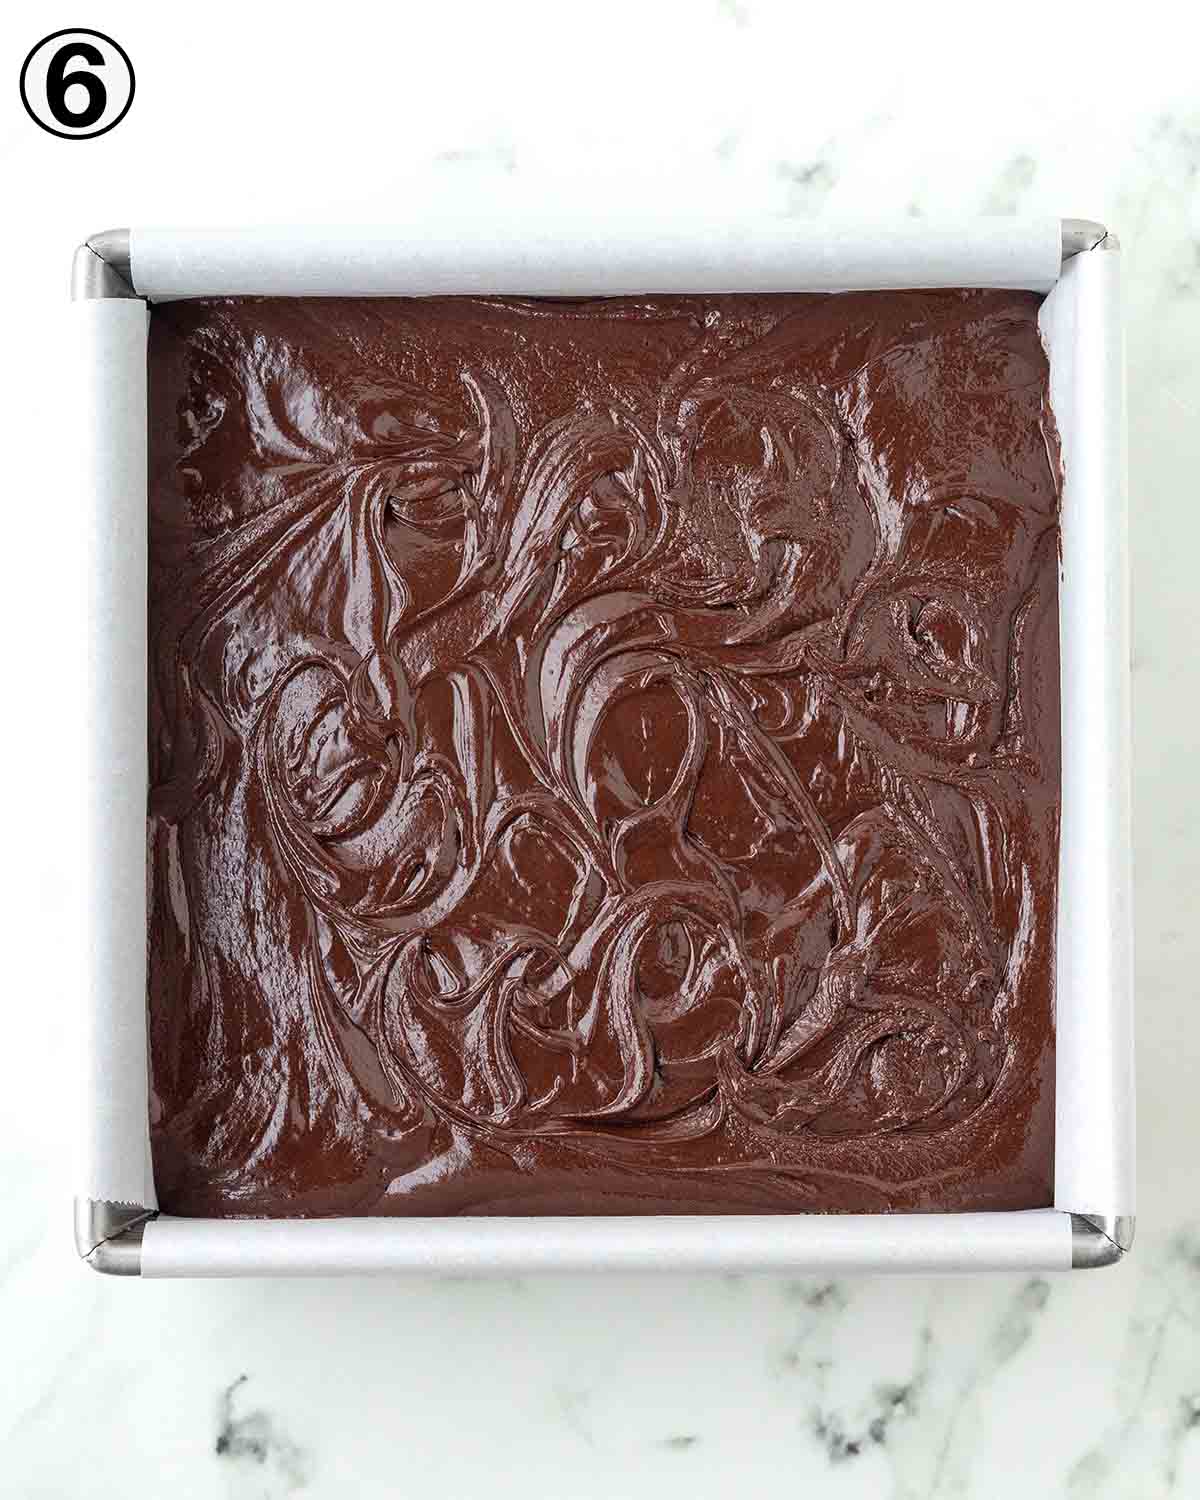 An overhead image of chocolate fudge in a square pan.